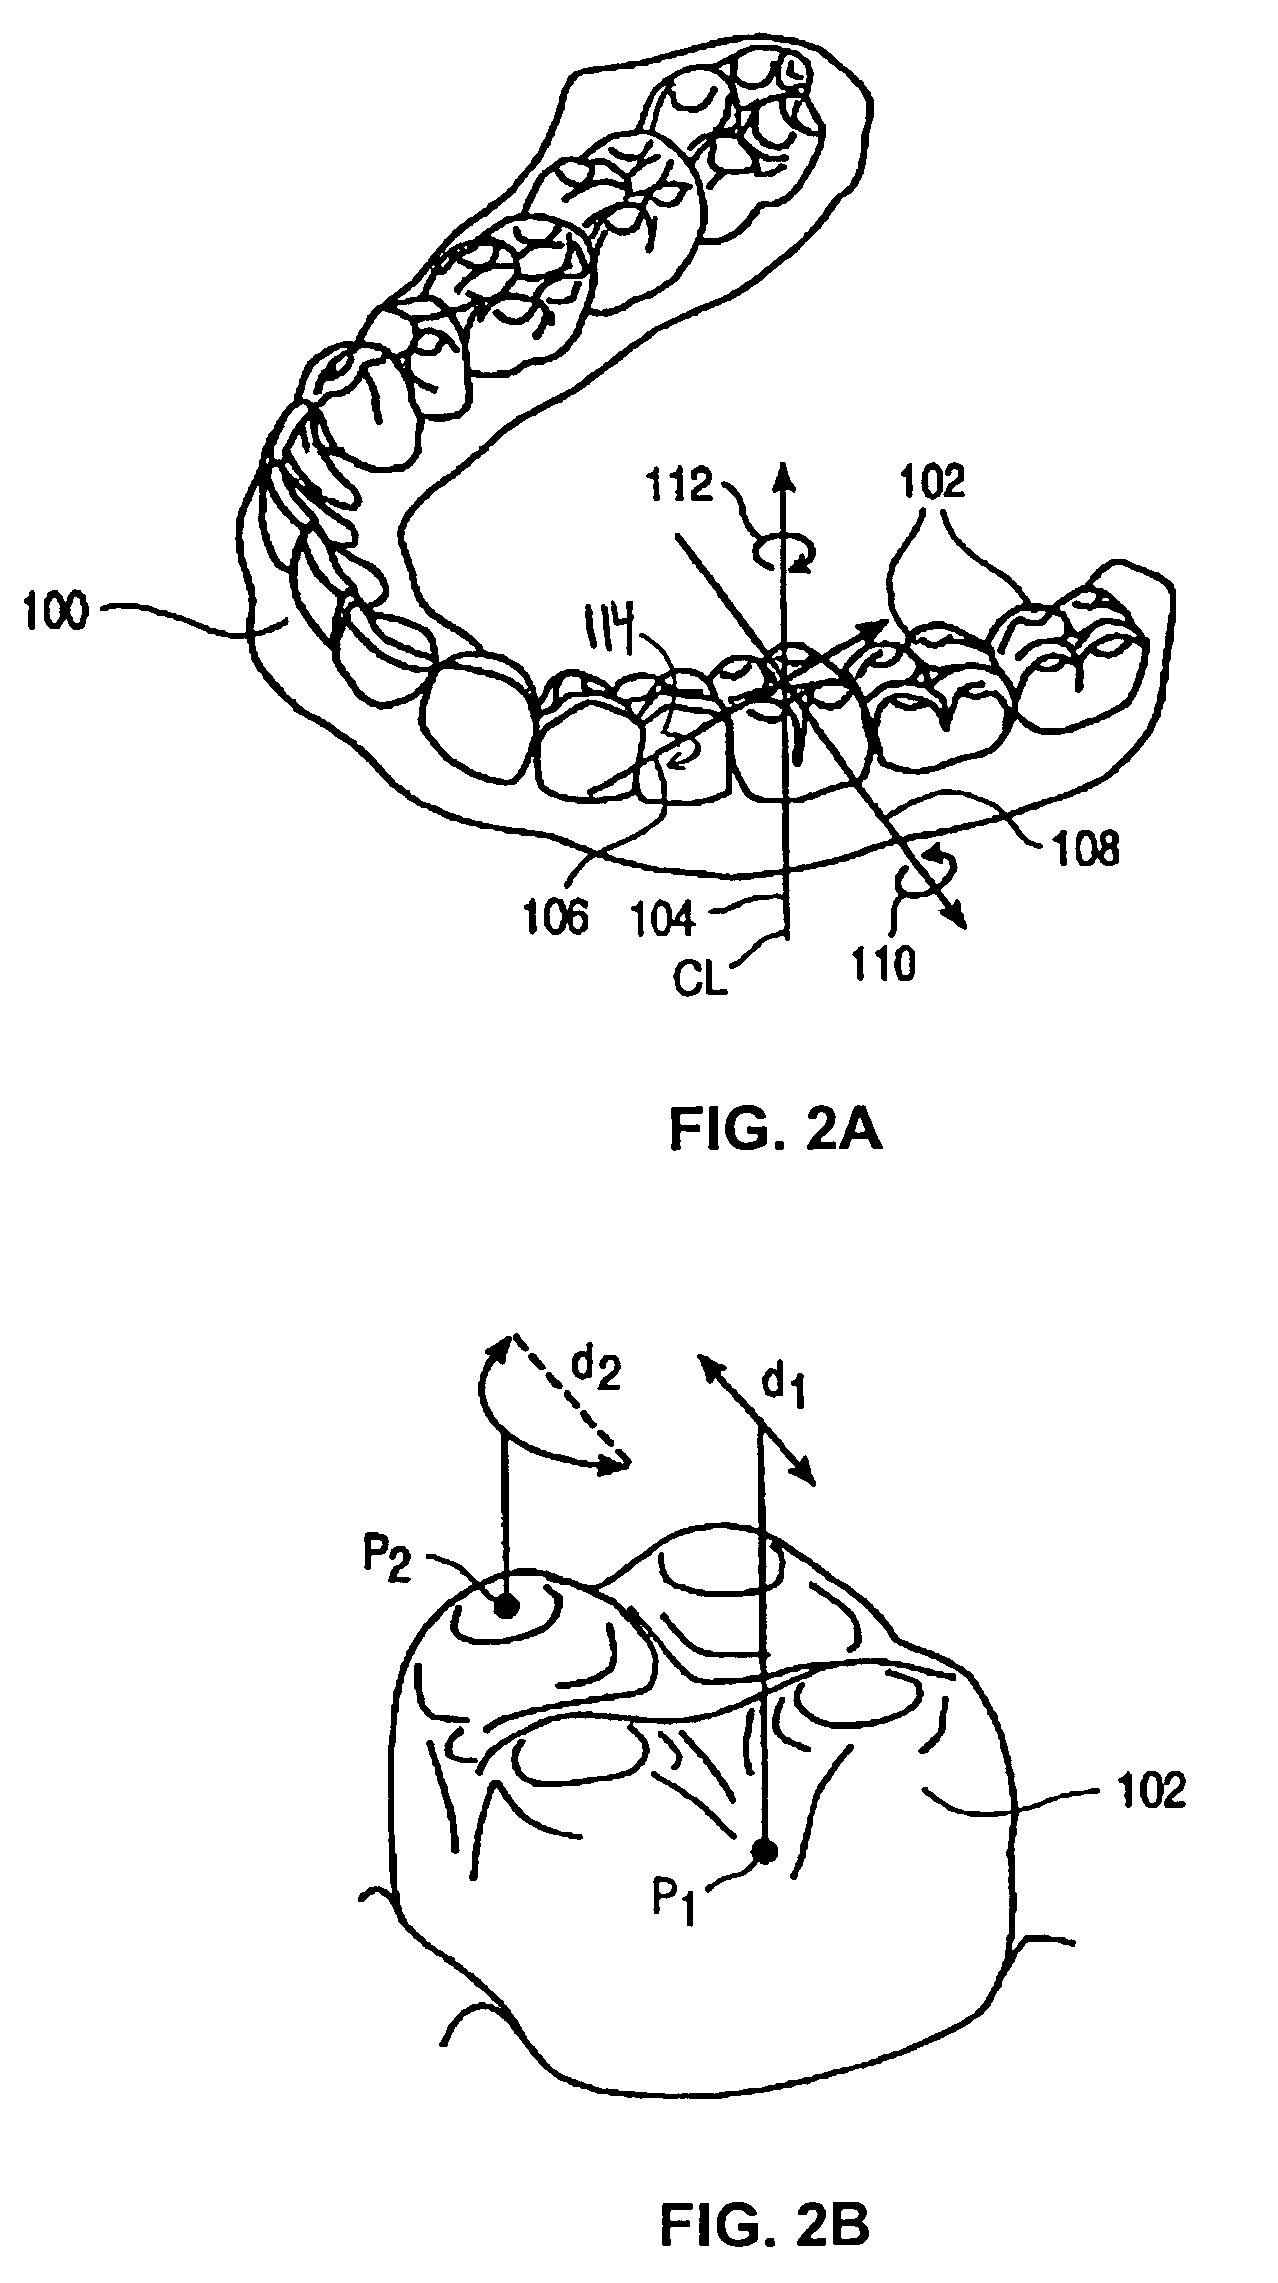 Systems and methods for positioning teeth